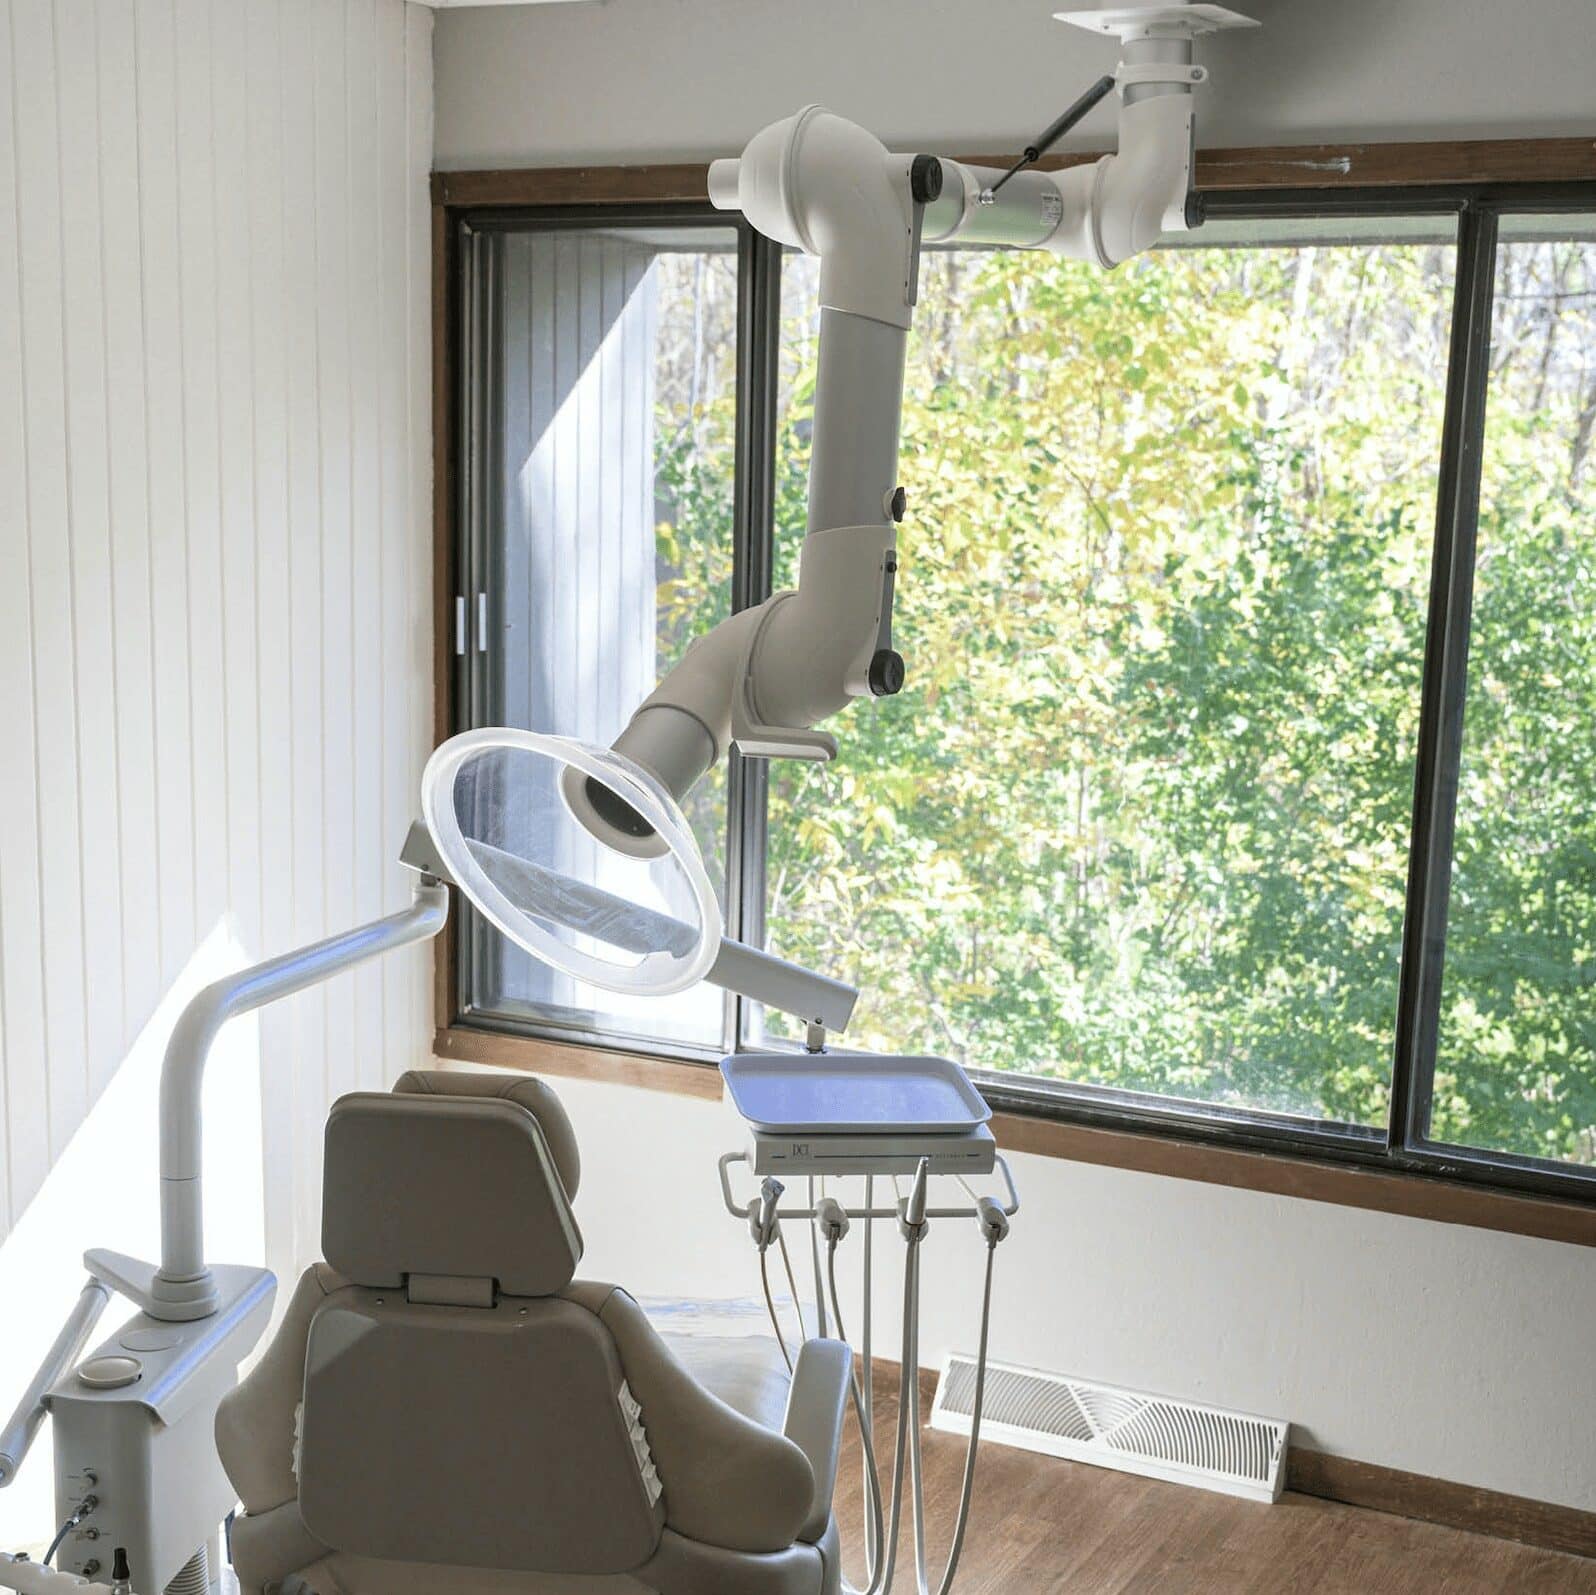 The arm unit of the Ventulus 300 series installed in a dental clinic